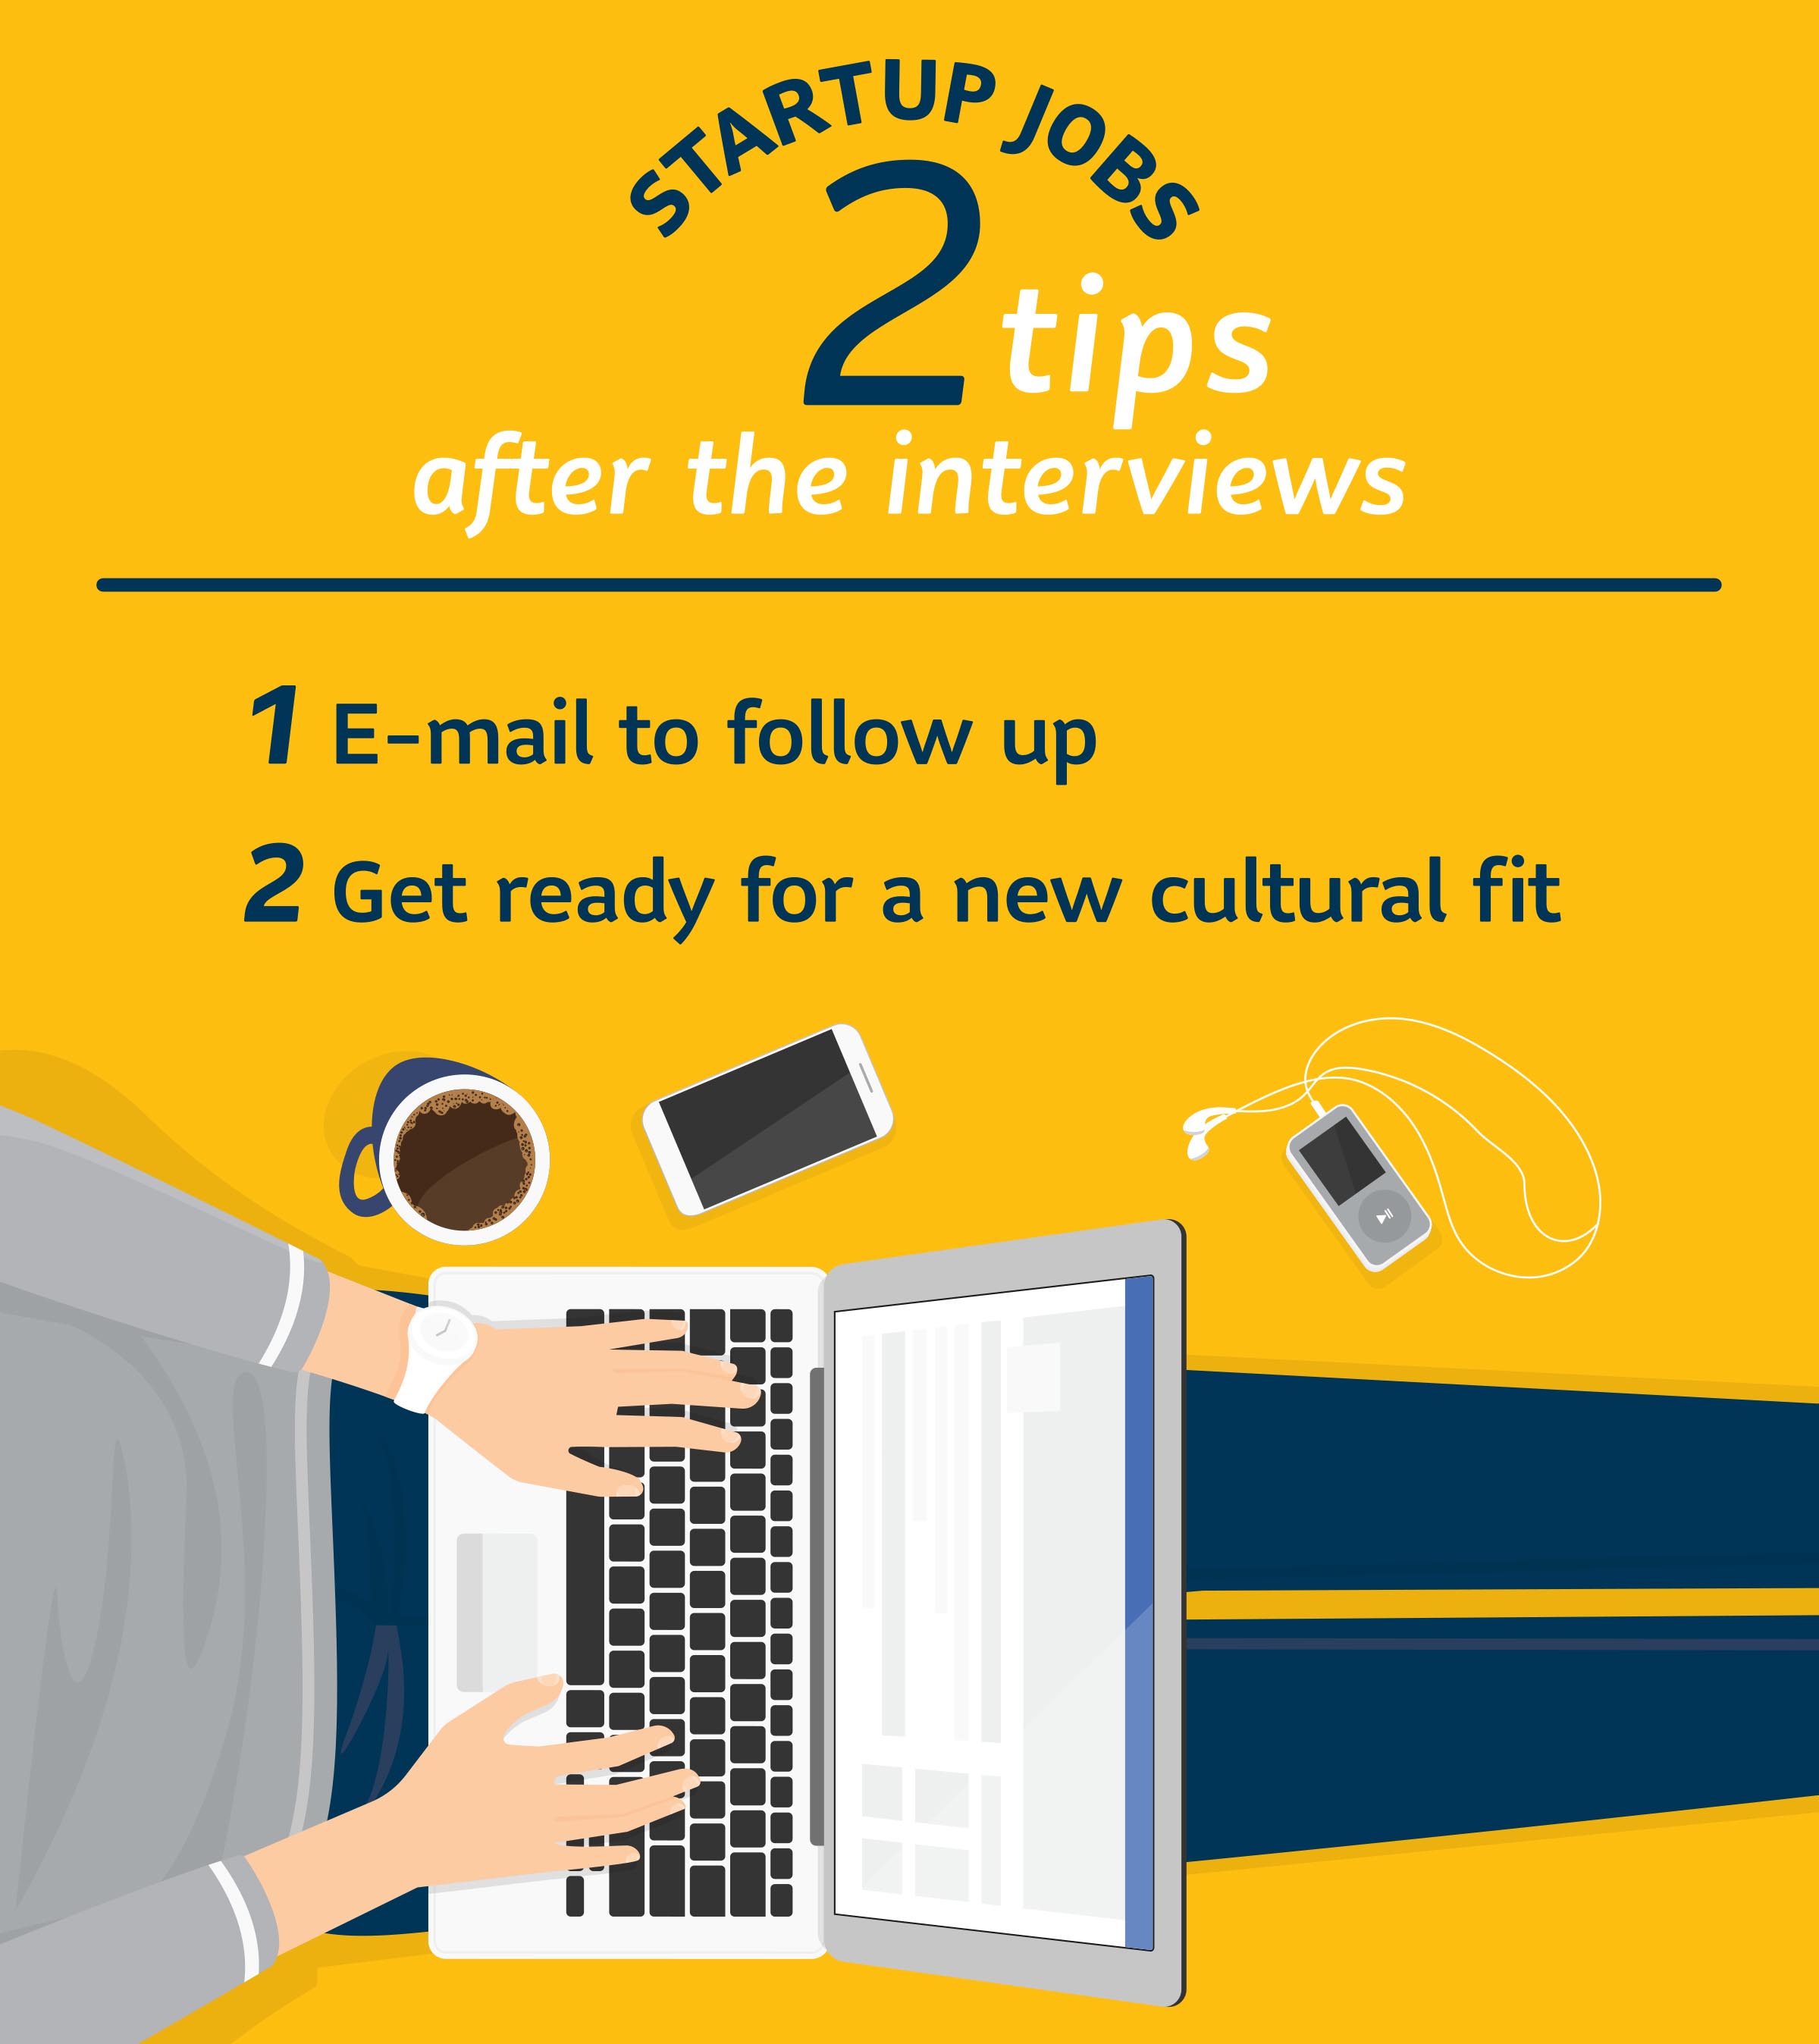 3 tips after interviewing for a startup job